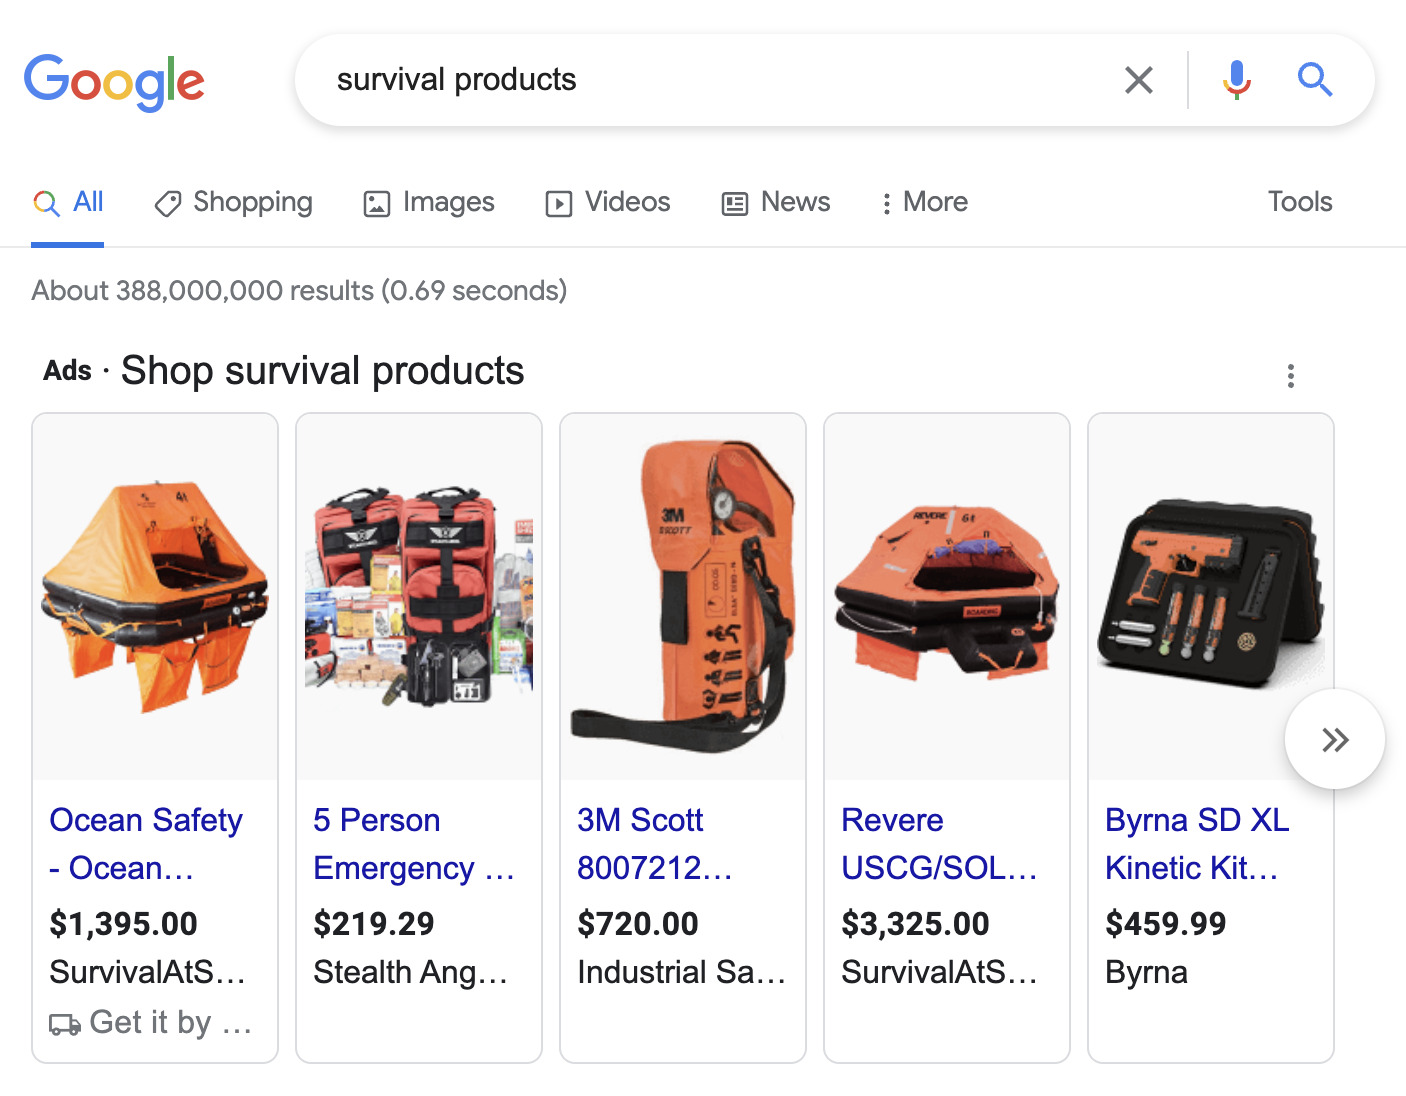 Google SERP for "survival products" 